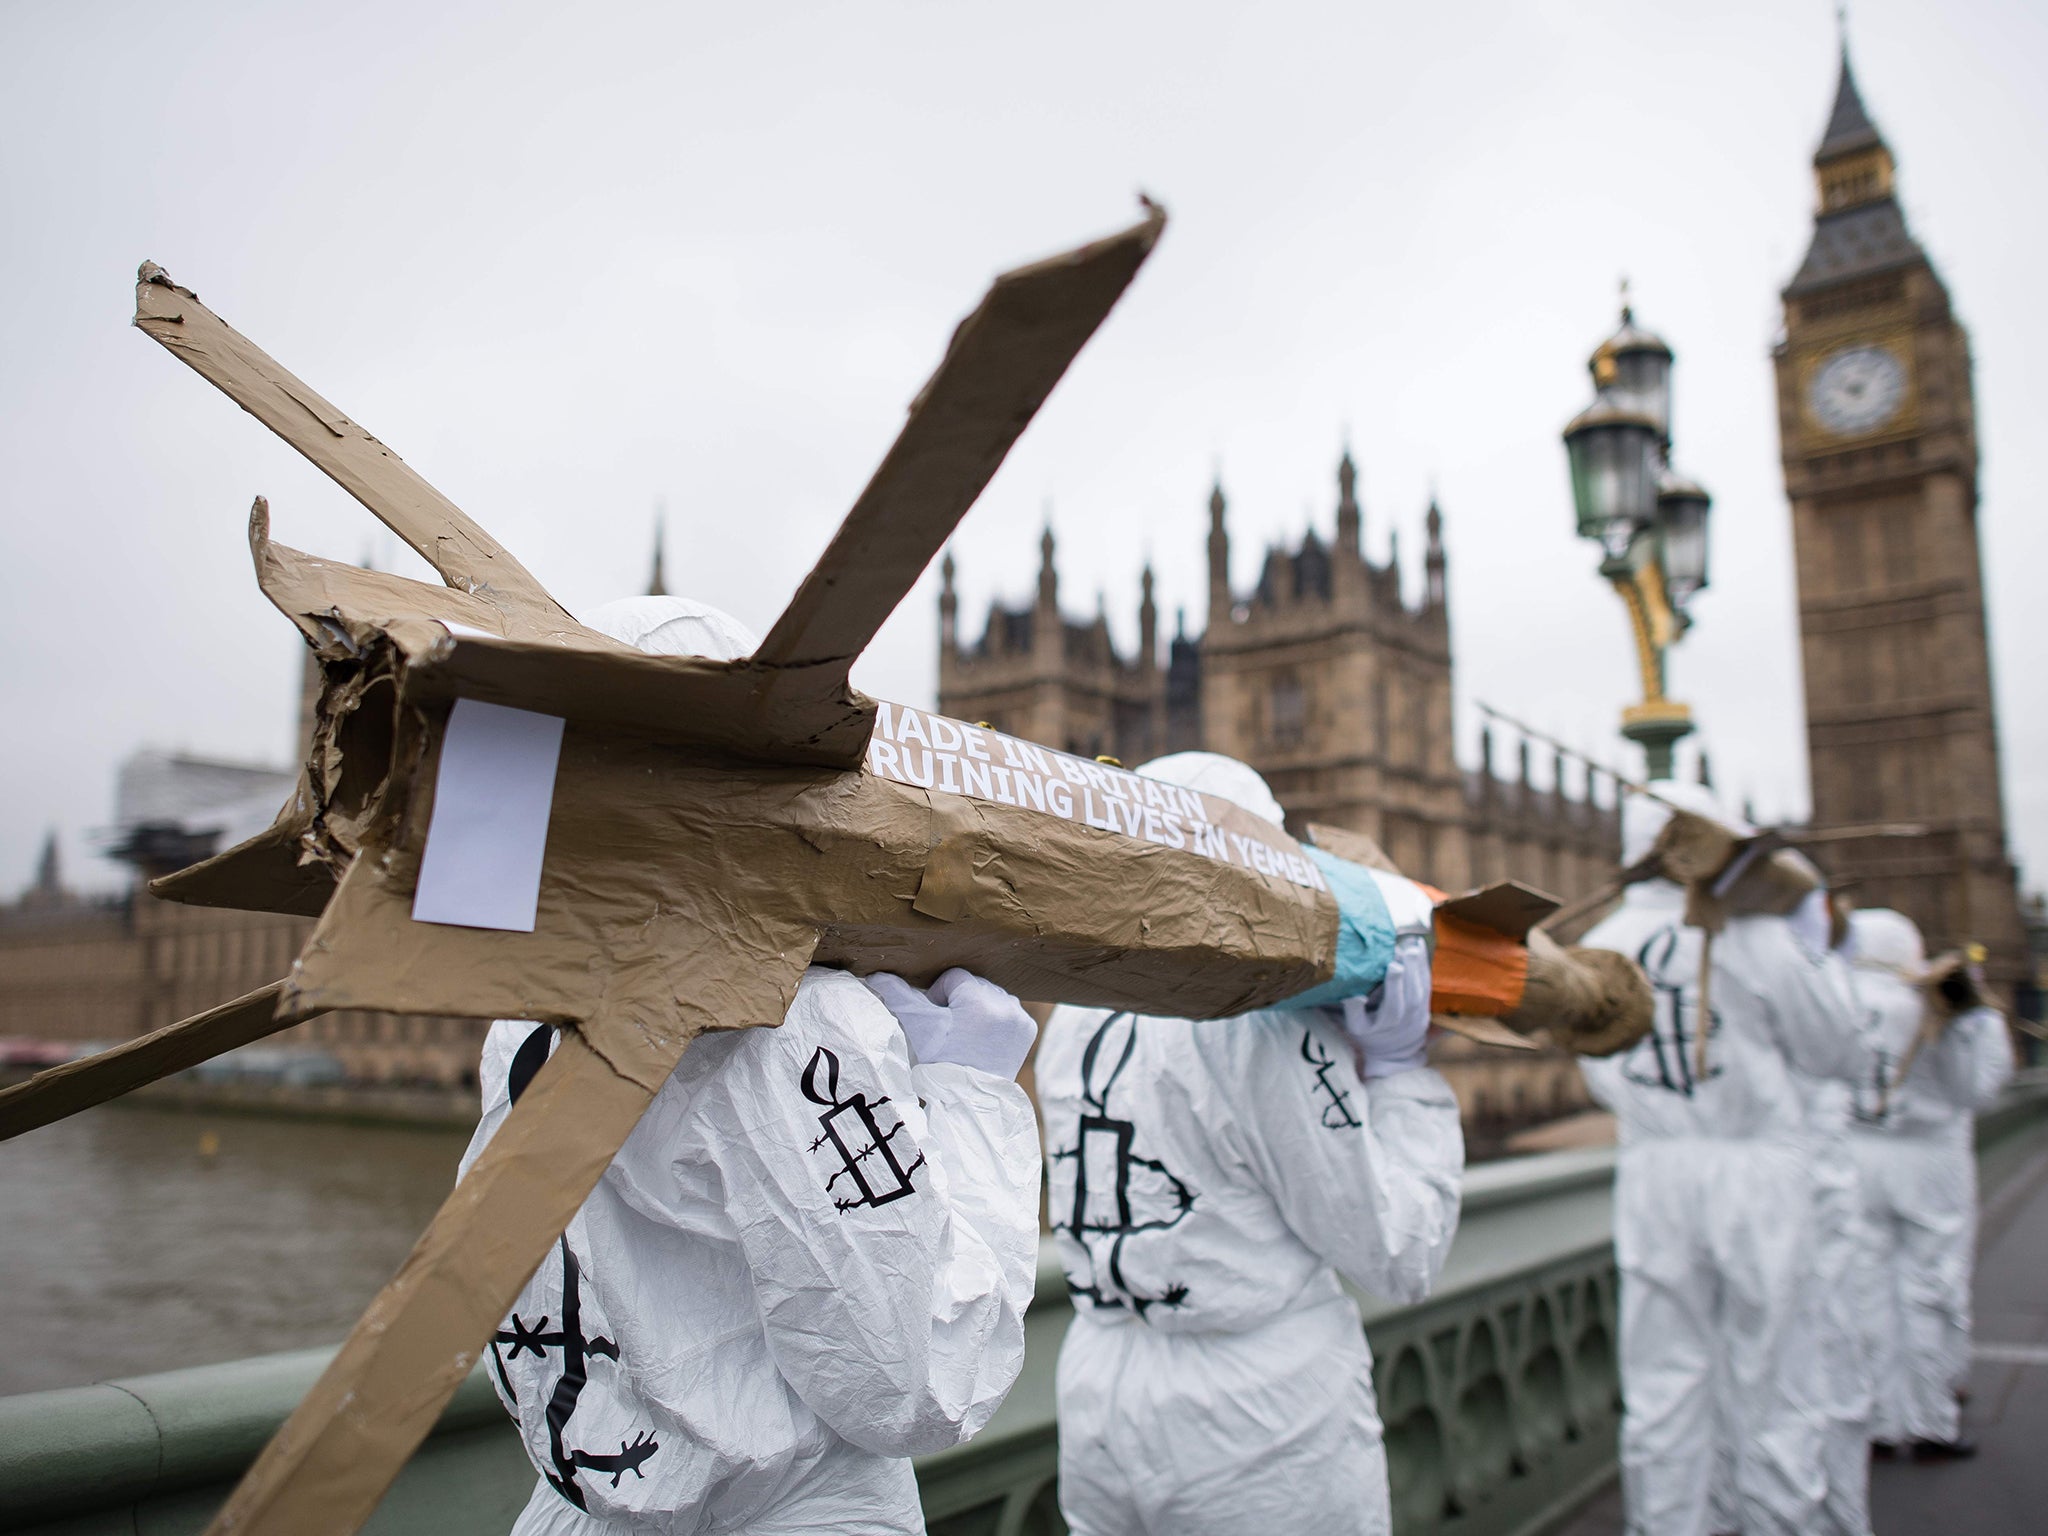 &#13;
Campaigners from Amnesty International carry model missiles across Westminster Bridge in a protest against British arms sales to Saudi Arabia&#13;